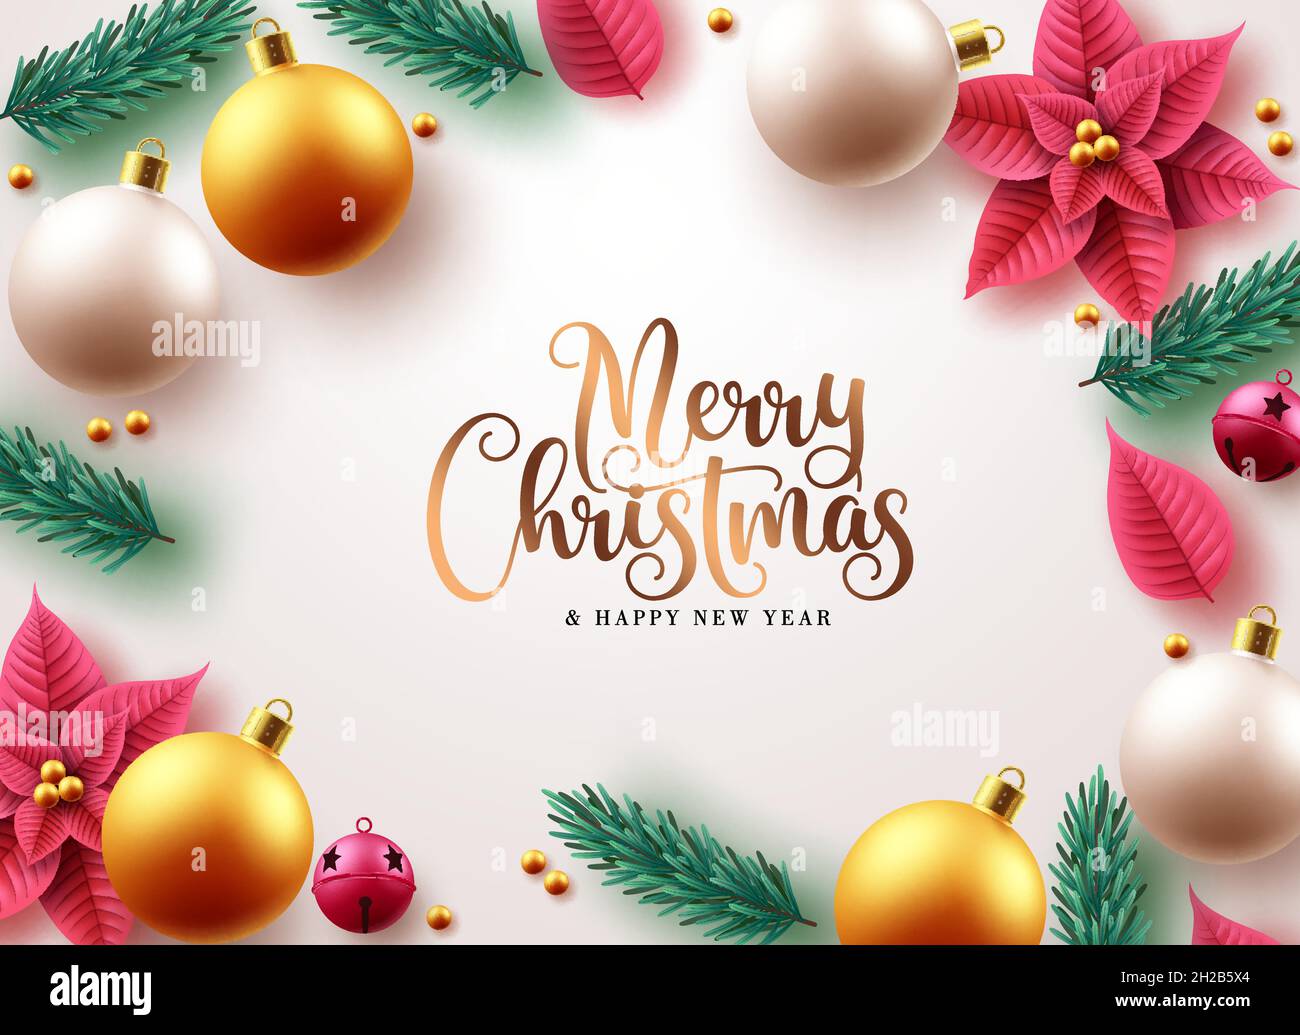 Merry christmas vector background design. Christmas greeting text ...